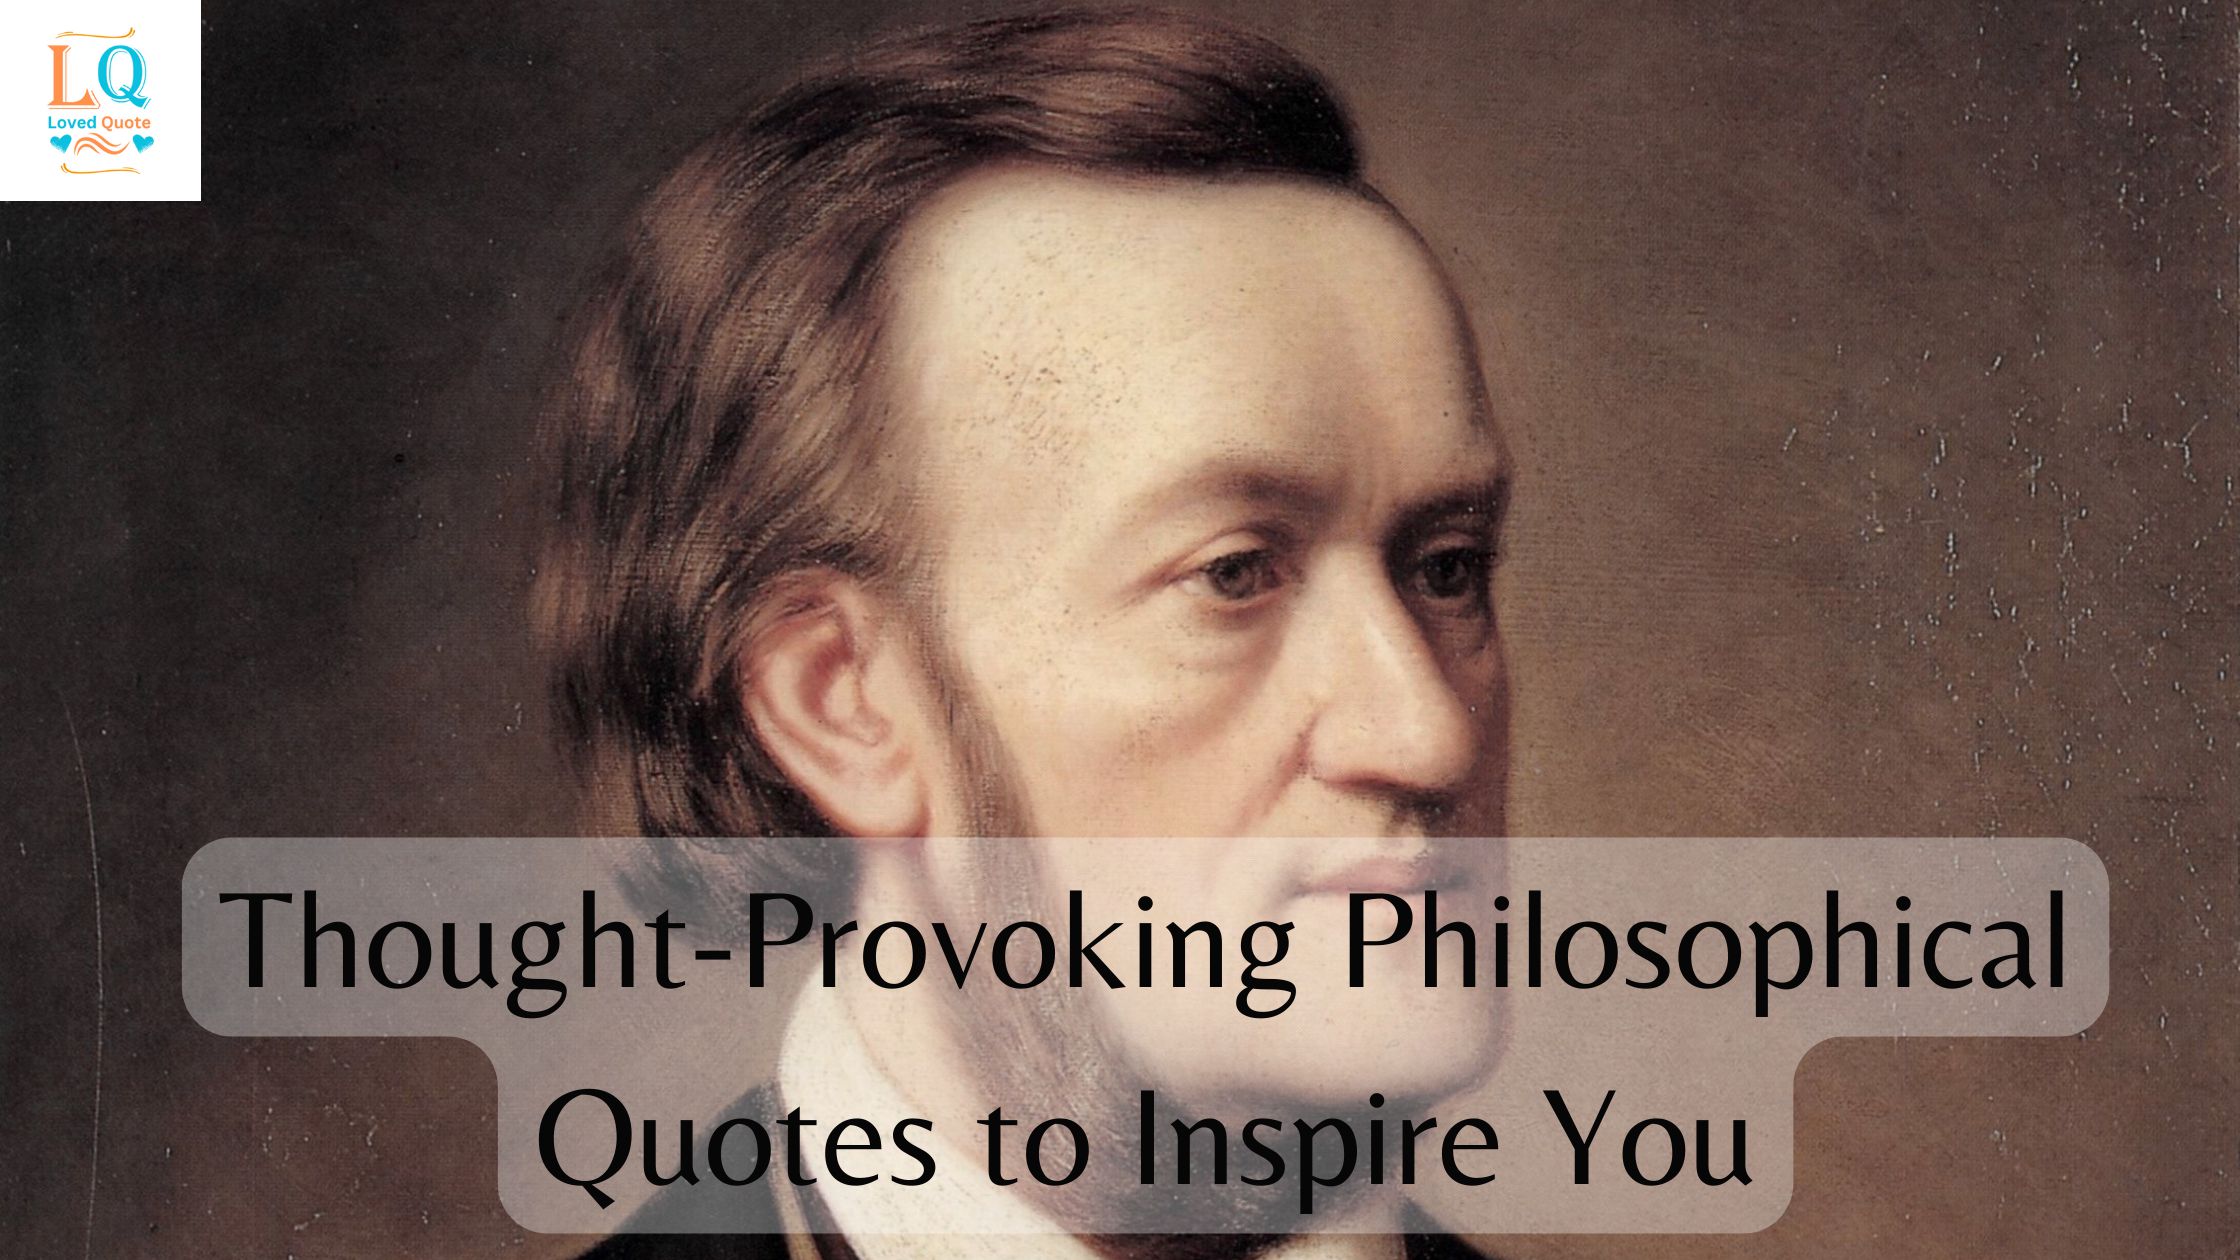 Thought-Provoking Philosophical Quotes to Inspire You